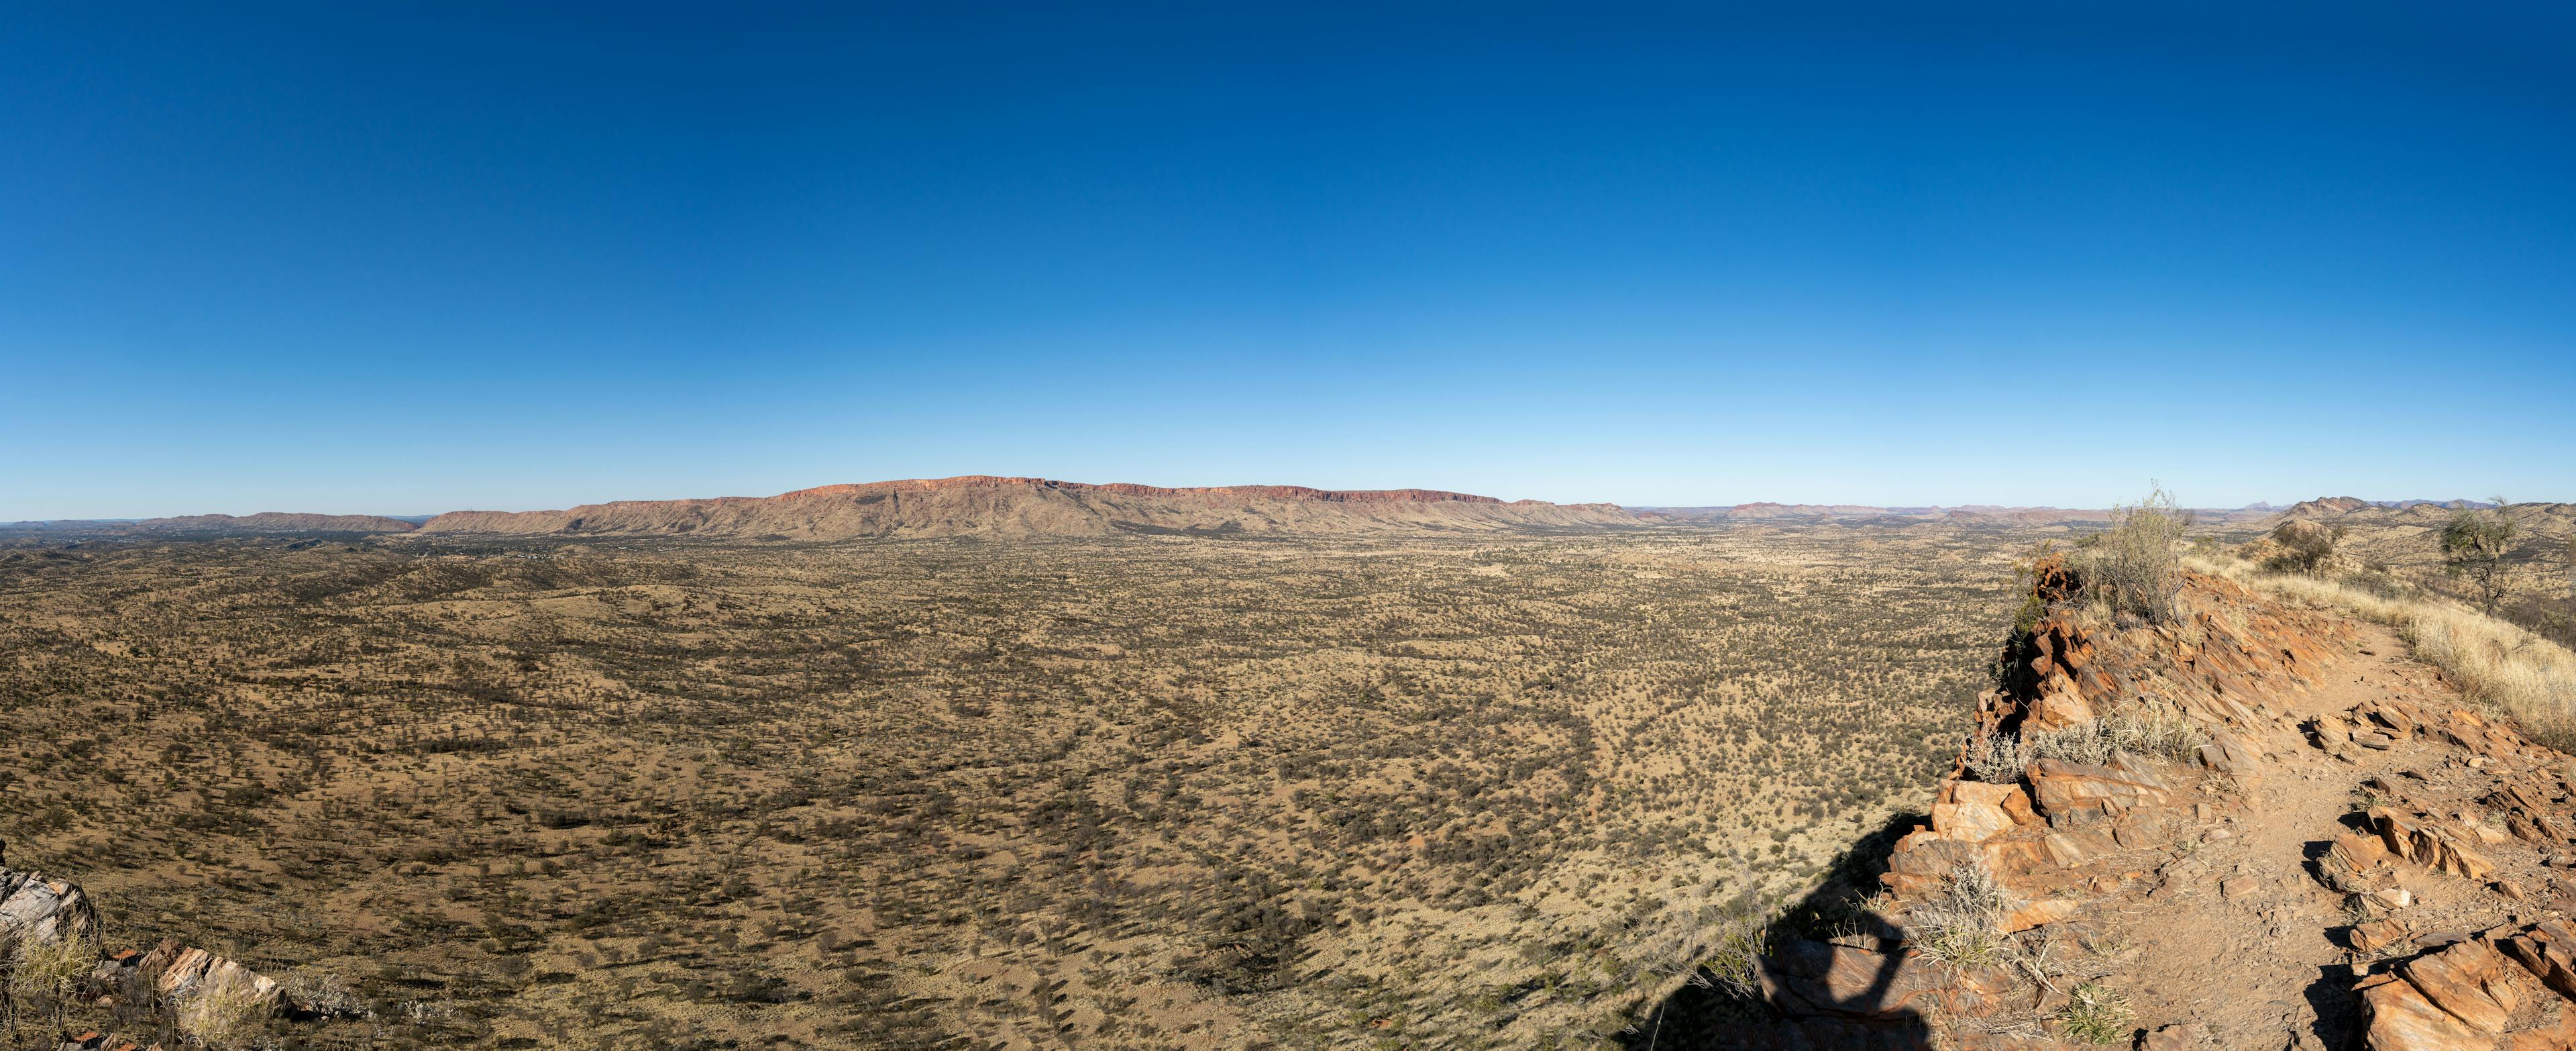 Protruding landscapes and large sweeping plains. To the left; Alice Springs, and the 'gap', the large break in the wall that separates the town from the vast expansive central desert of Australia. 